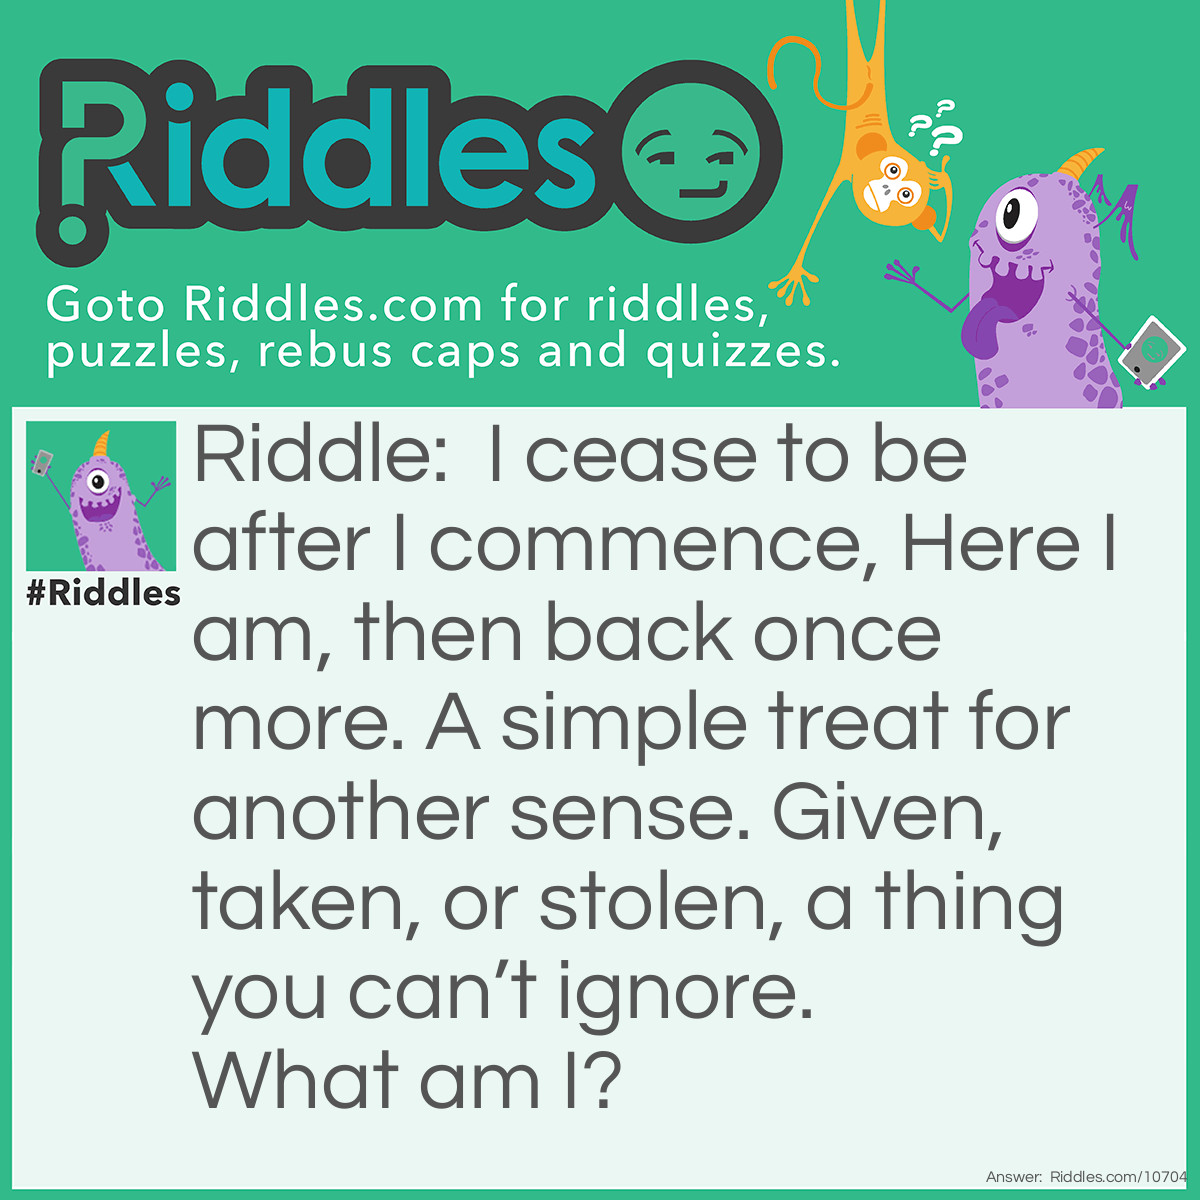 Riddle: I cease to be after I commence, Here I am, then back once more. A simple treat for another sense. Given, taken, or stolen, a thing you can’t ignore. What am I? Answer: A glance.